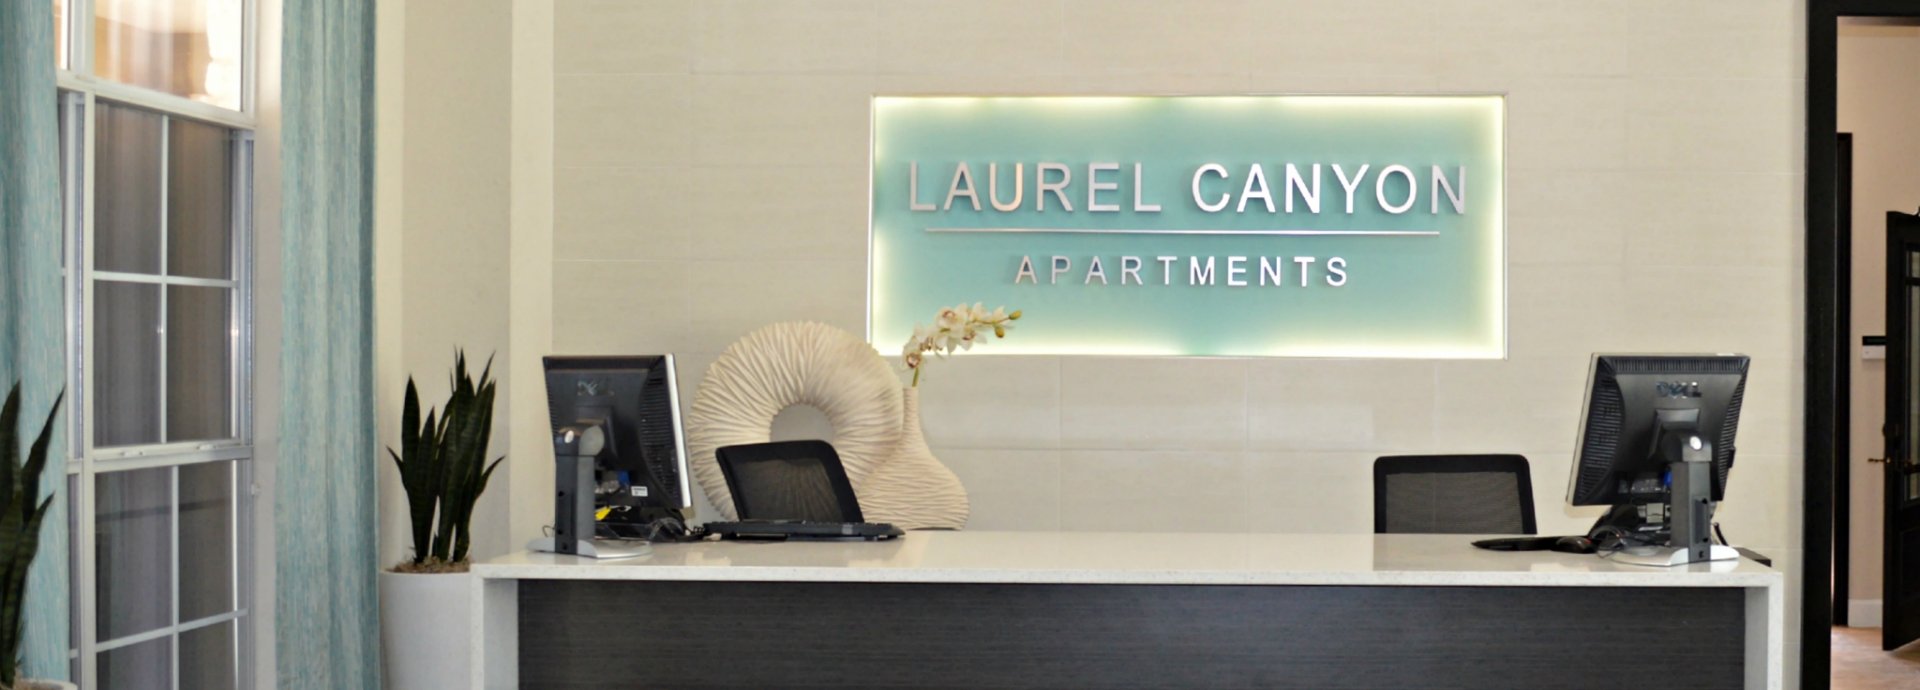 Apartments Canyon Laurel will still be popular in 2016